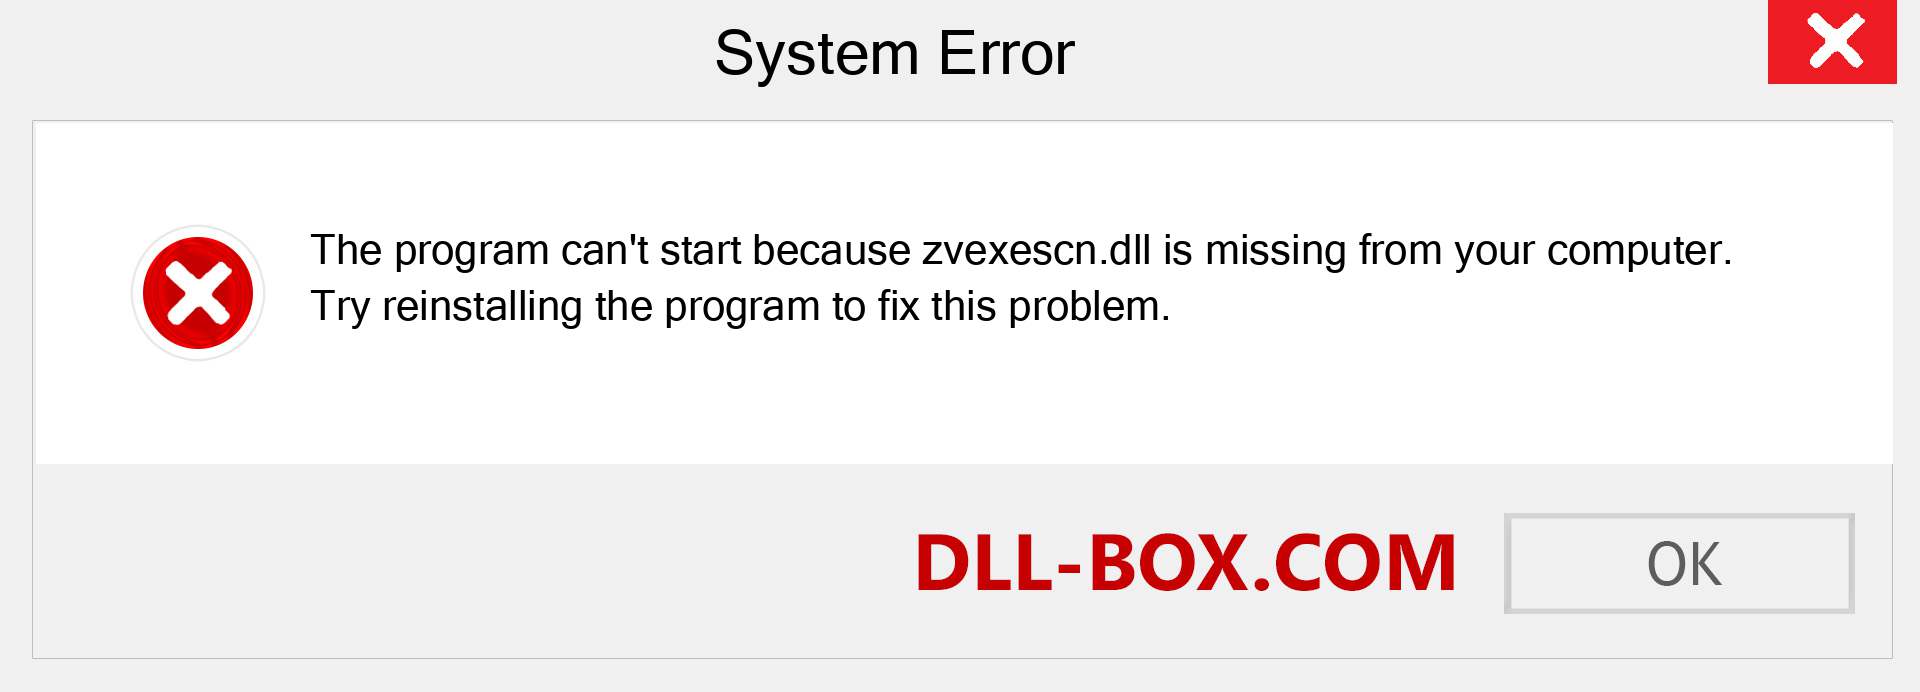  zvexescn.dll file is missing?. Download for Windows 7, 8, 10 - Fix  zvexescn dll Missing Error on Windows, photos, images